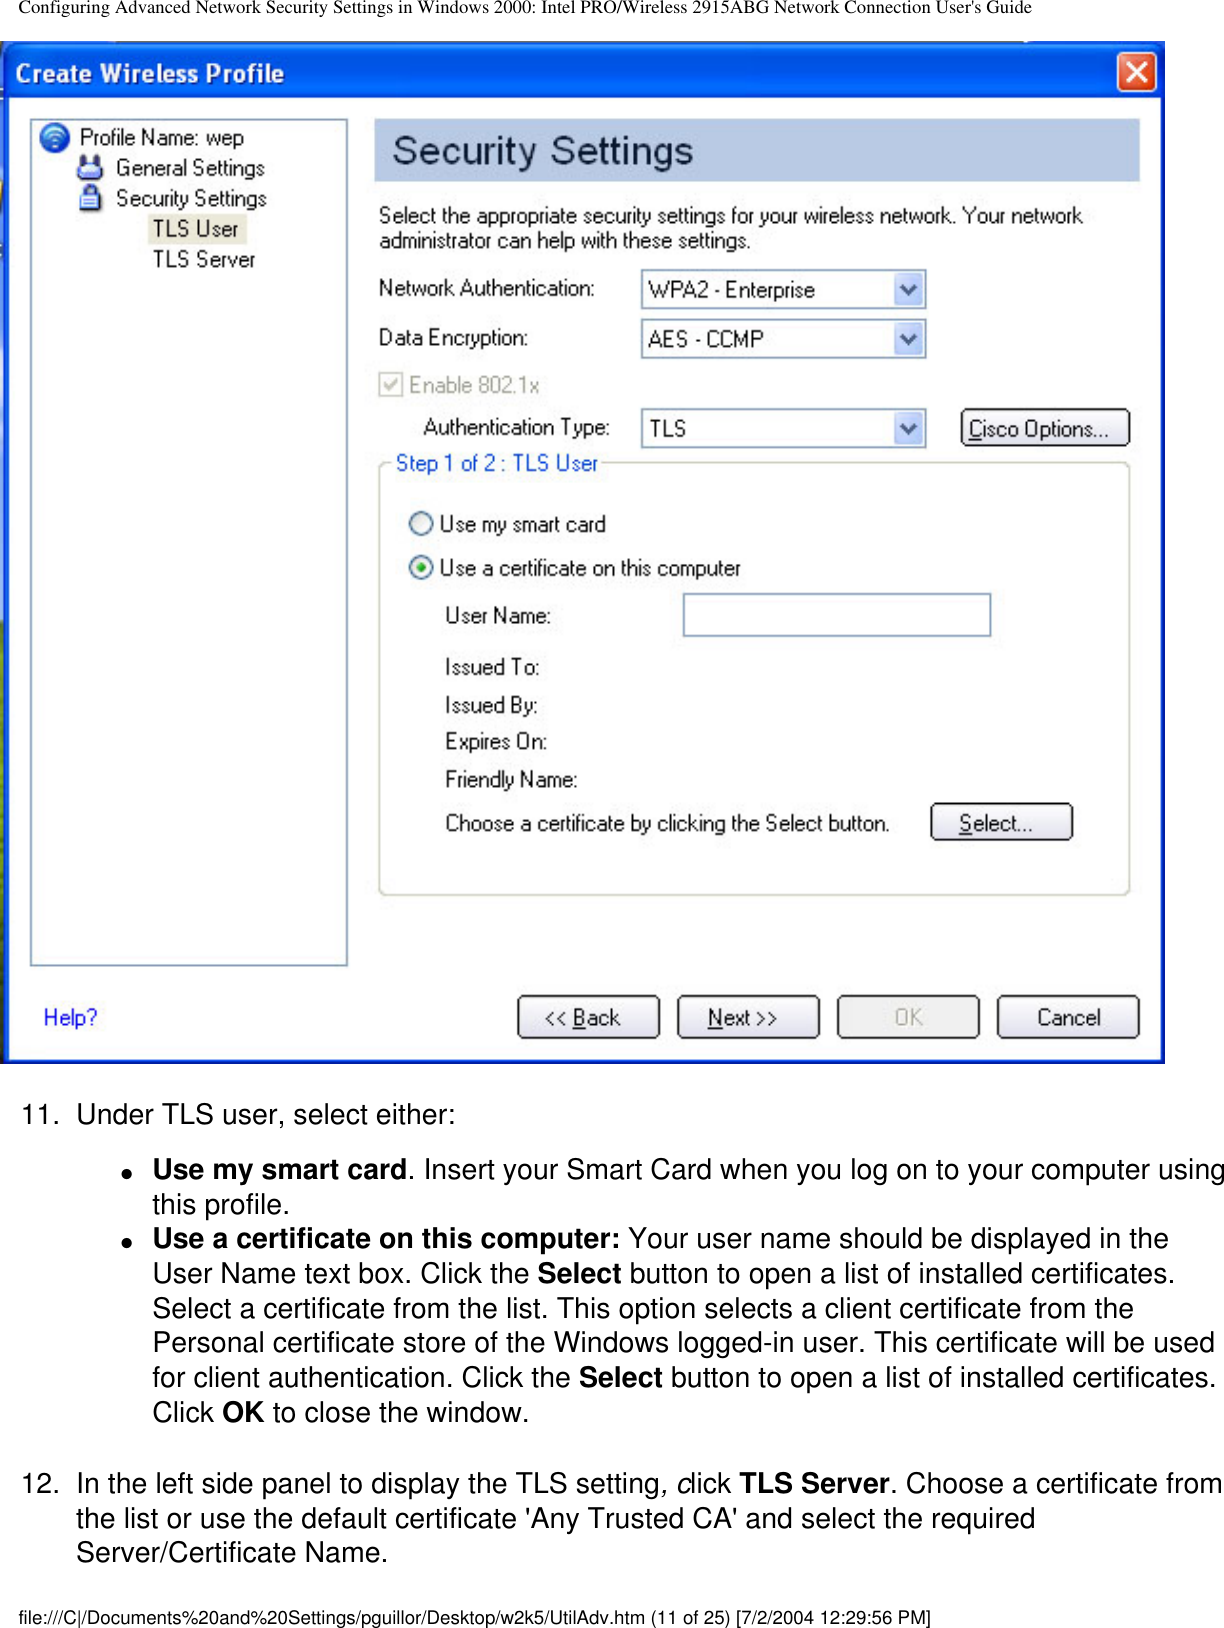 Configuring Advanced Network Security Settings in Windows 2000: Intel PRO/Wireless 2915ABG Network Connection User&apos;s Guide11.  Under TLS user, select either:●     Use my smart card. Insert your Smart Card when you log on to your computer using this profile.●     Use a certificate on this computer: Your user name should be displayed in the User Name text box. Click the Select button to open a list of installed certificates. Select a certificate from the list. This option selects a client certificate from the Personal certificate store of the Windows logged-in user. This certificate will be used for client authentication. Click the Select button to open a list of installed certificates. Click OK to close the window.12.  In the left side panel to display the TLS setting, click TLS Server. Choose a certificate from the list or use the default certificate &apos;Any Trusted CA&apos; and select the required Server/Certificate Name. file:///C|/Documents%20and%20Settings/pguillor/Desktop/w2k5/UtilAdv.htm (11 of 25) [7/2/2004 12:29:56 PM]